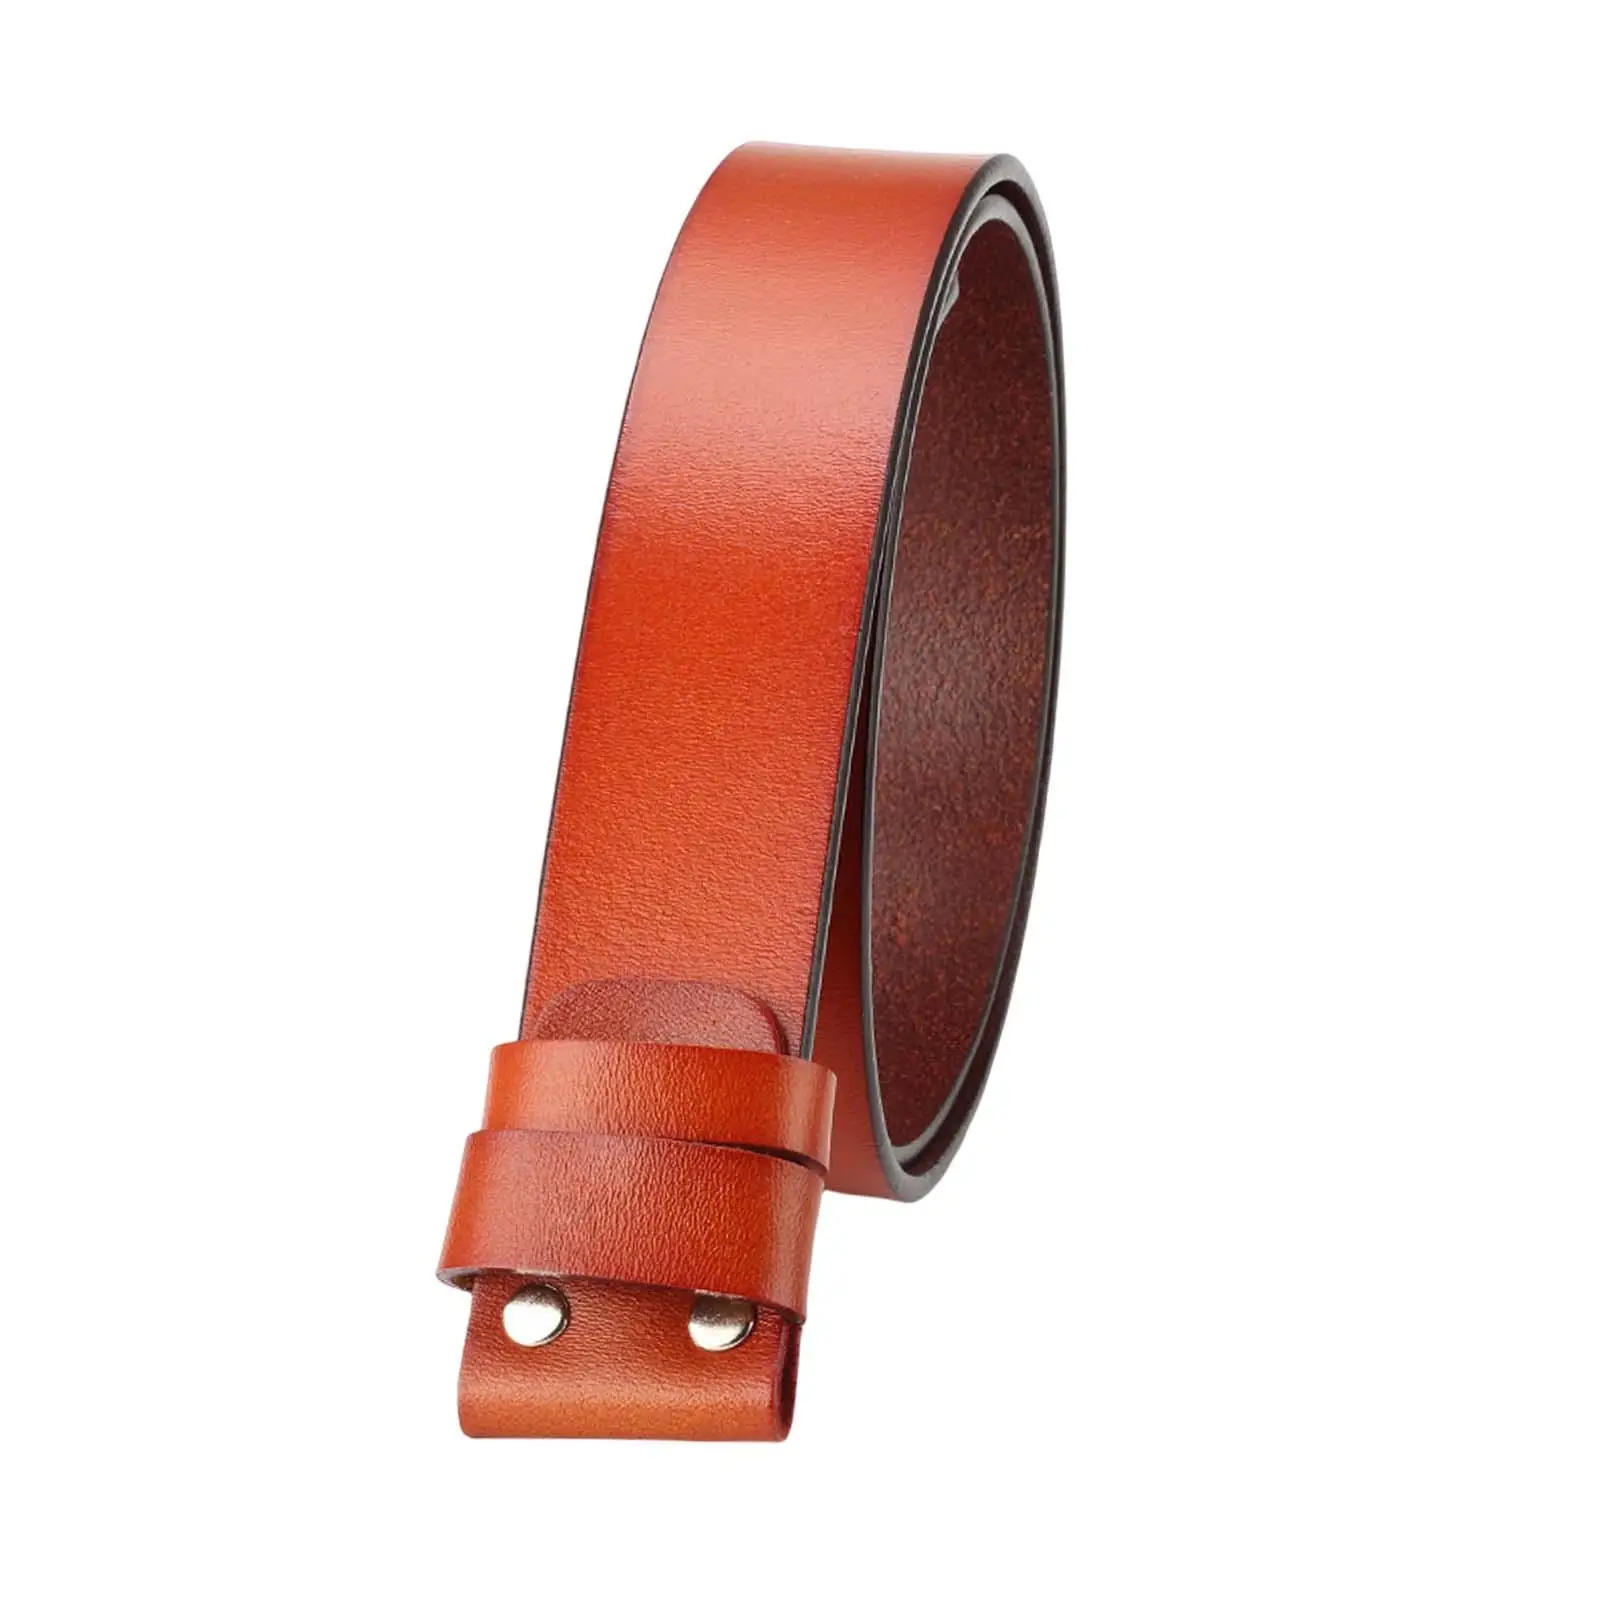 No Buckle Belt Western Replacement Belt Strap for Replacement Trousers Jeans